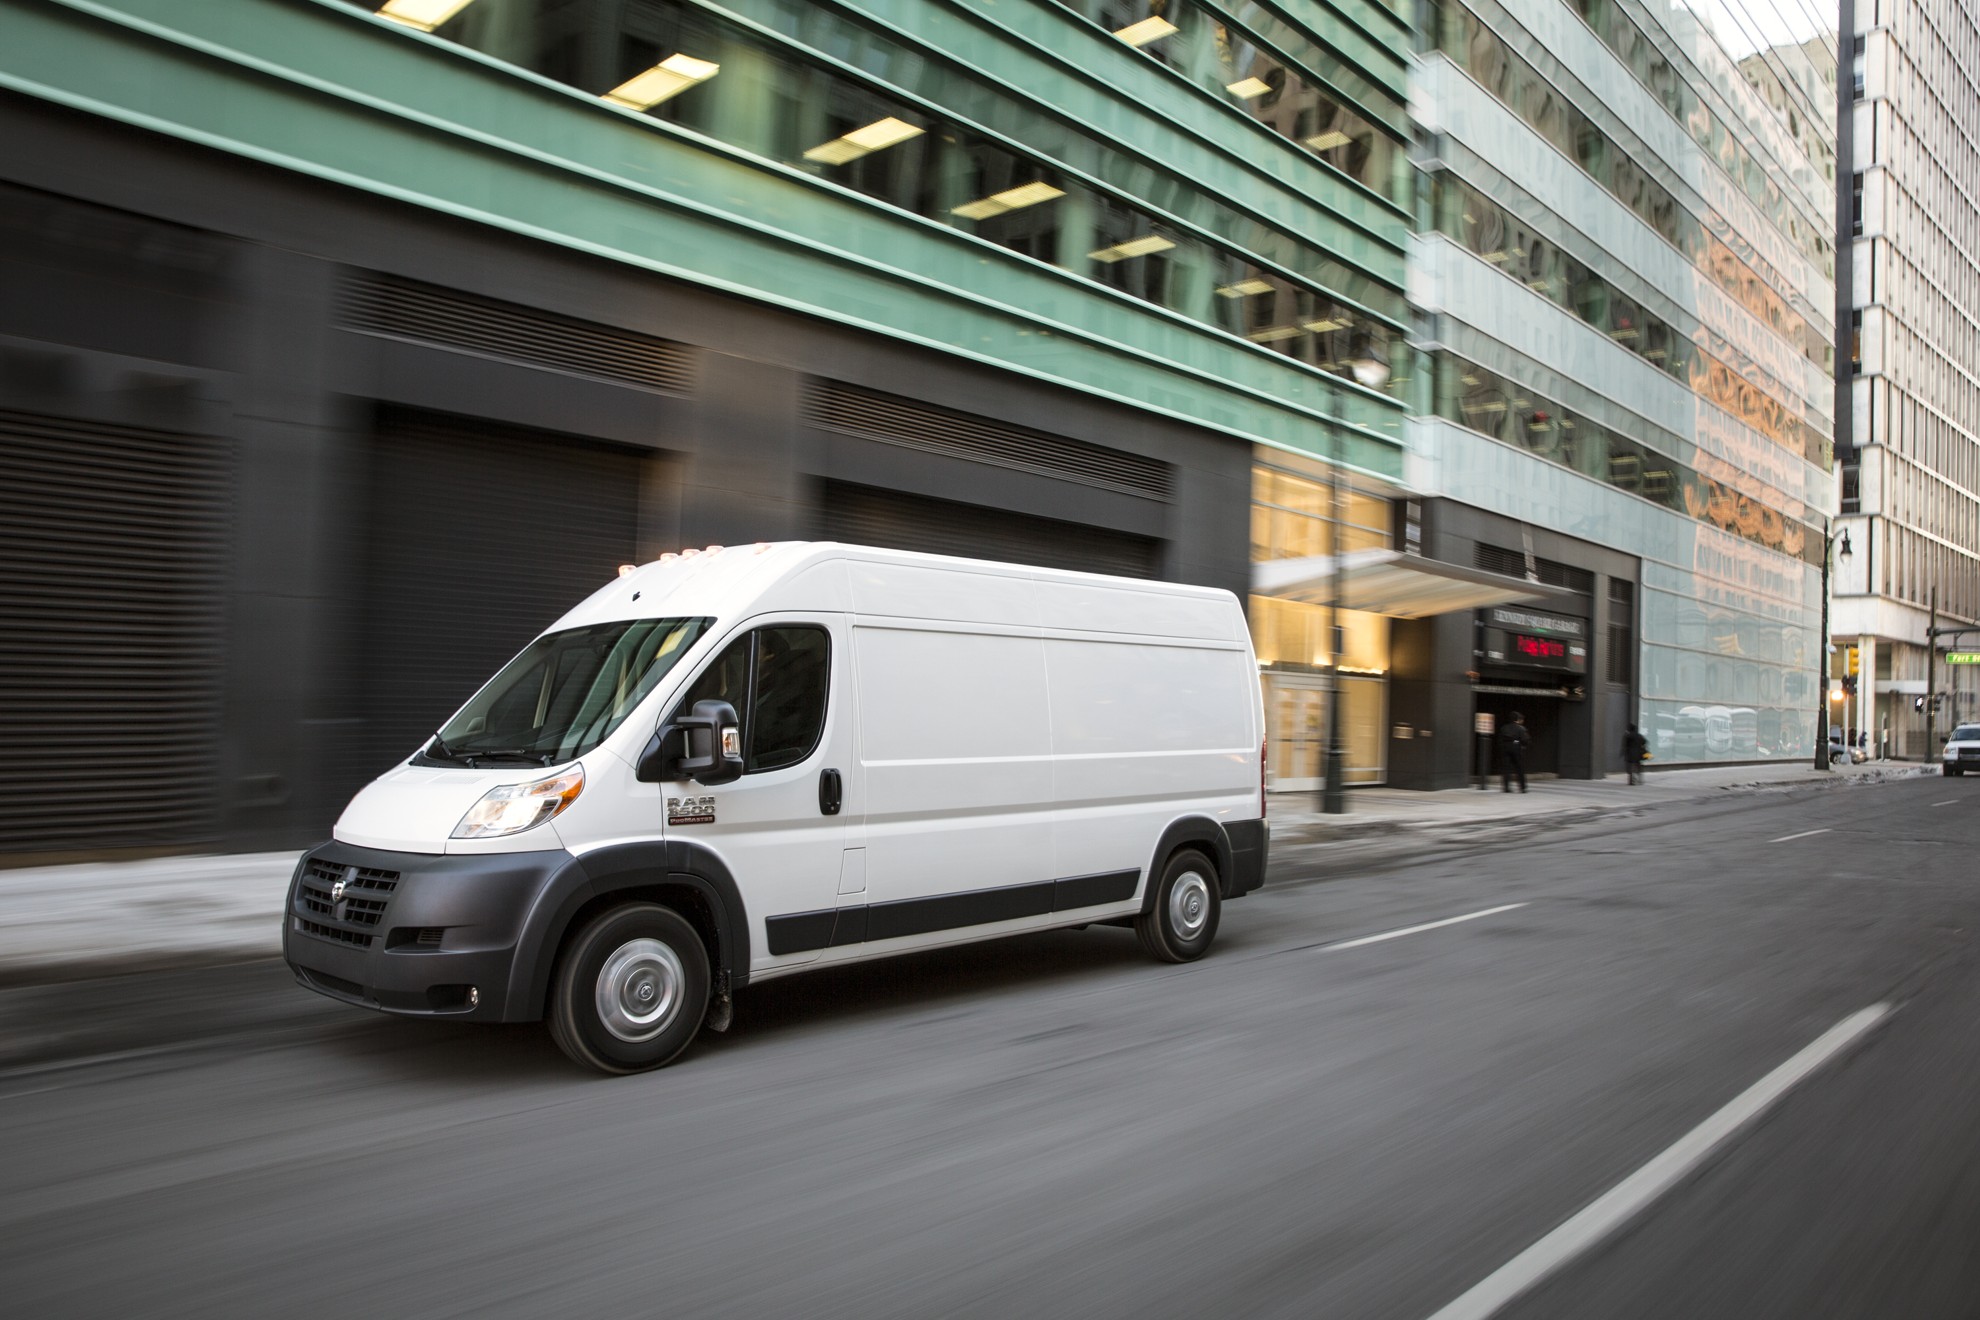 NEW 2014 RAM PROMASTER EXPANDS RAM COMMERCIAL OFFERINGS